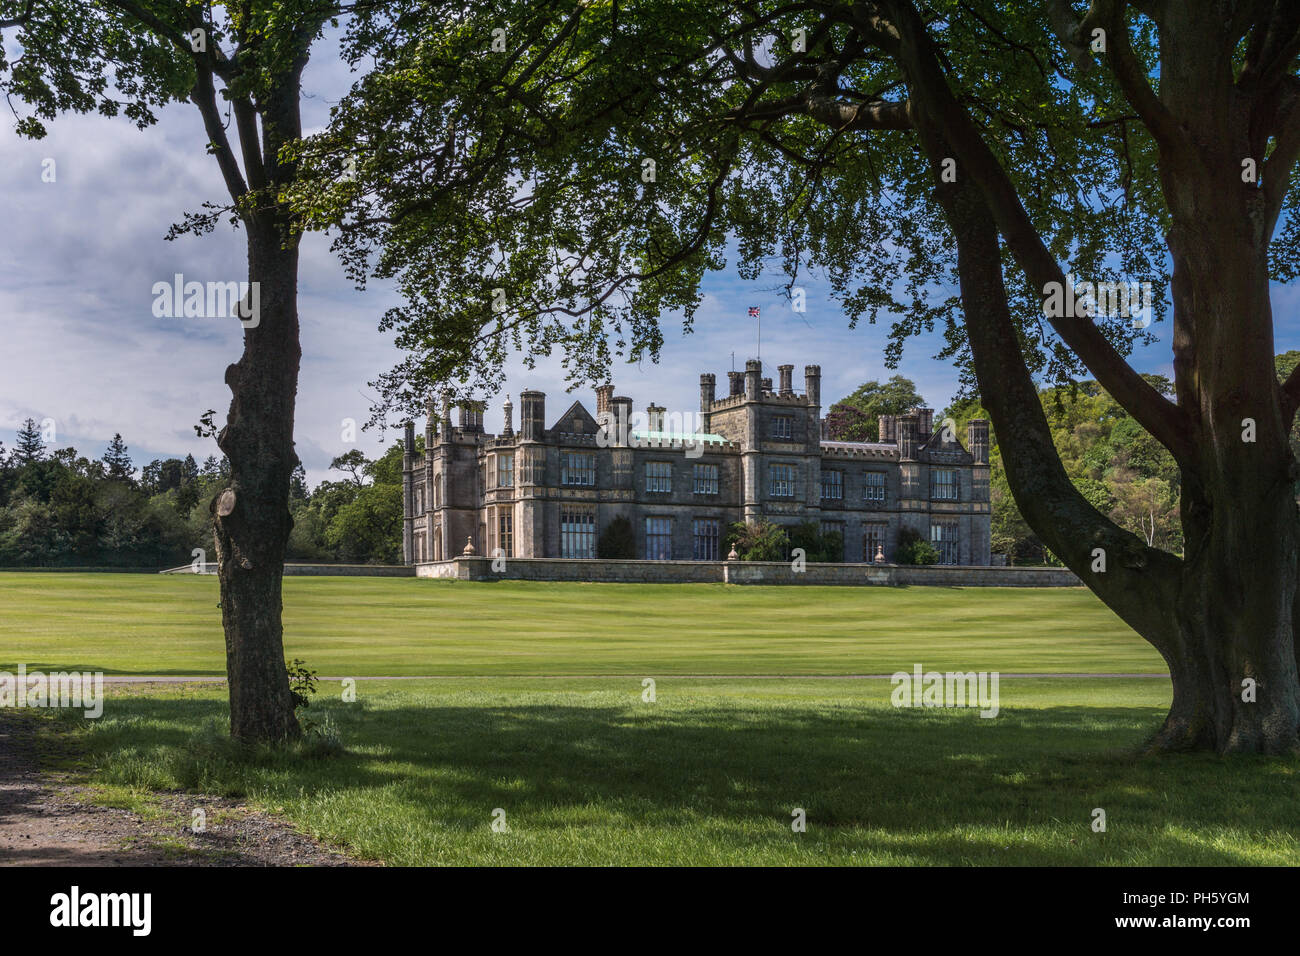 Edinburgh, Scotland, UK - June 14, 2012: Dalmany house, mansion and castle in Tudor revival style as seen from under foliage of woods. Blue sky. Stock Photo